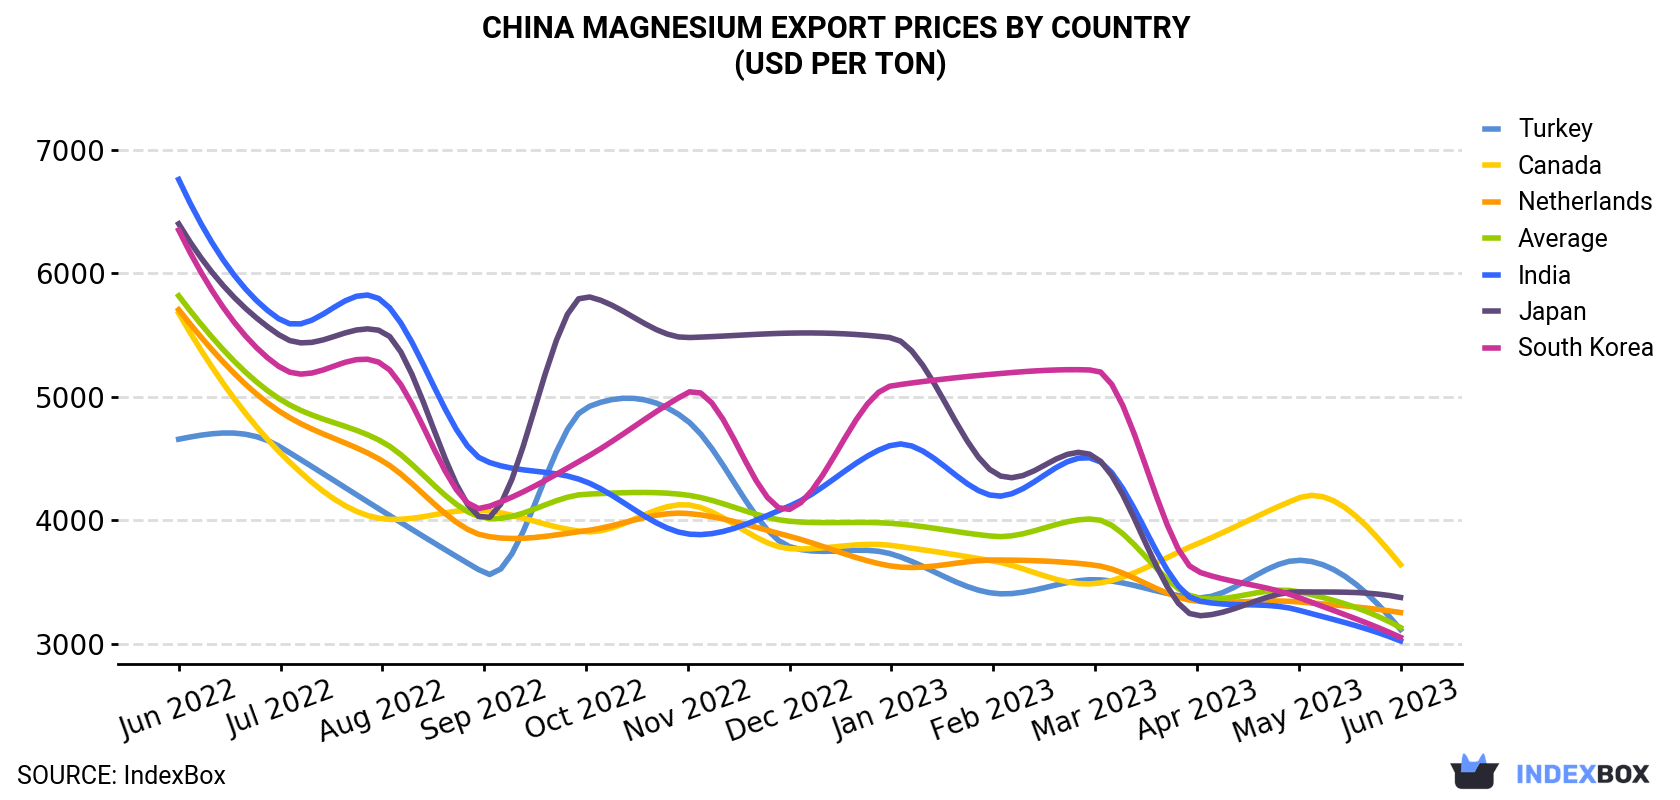 China Magnesium Export Prices By Country (USD Per Ton)